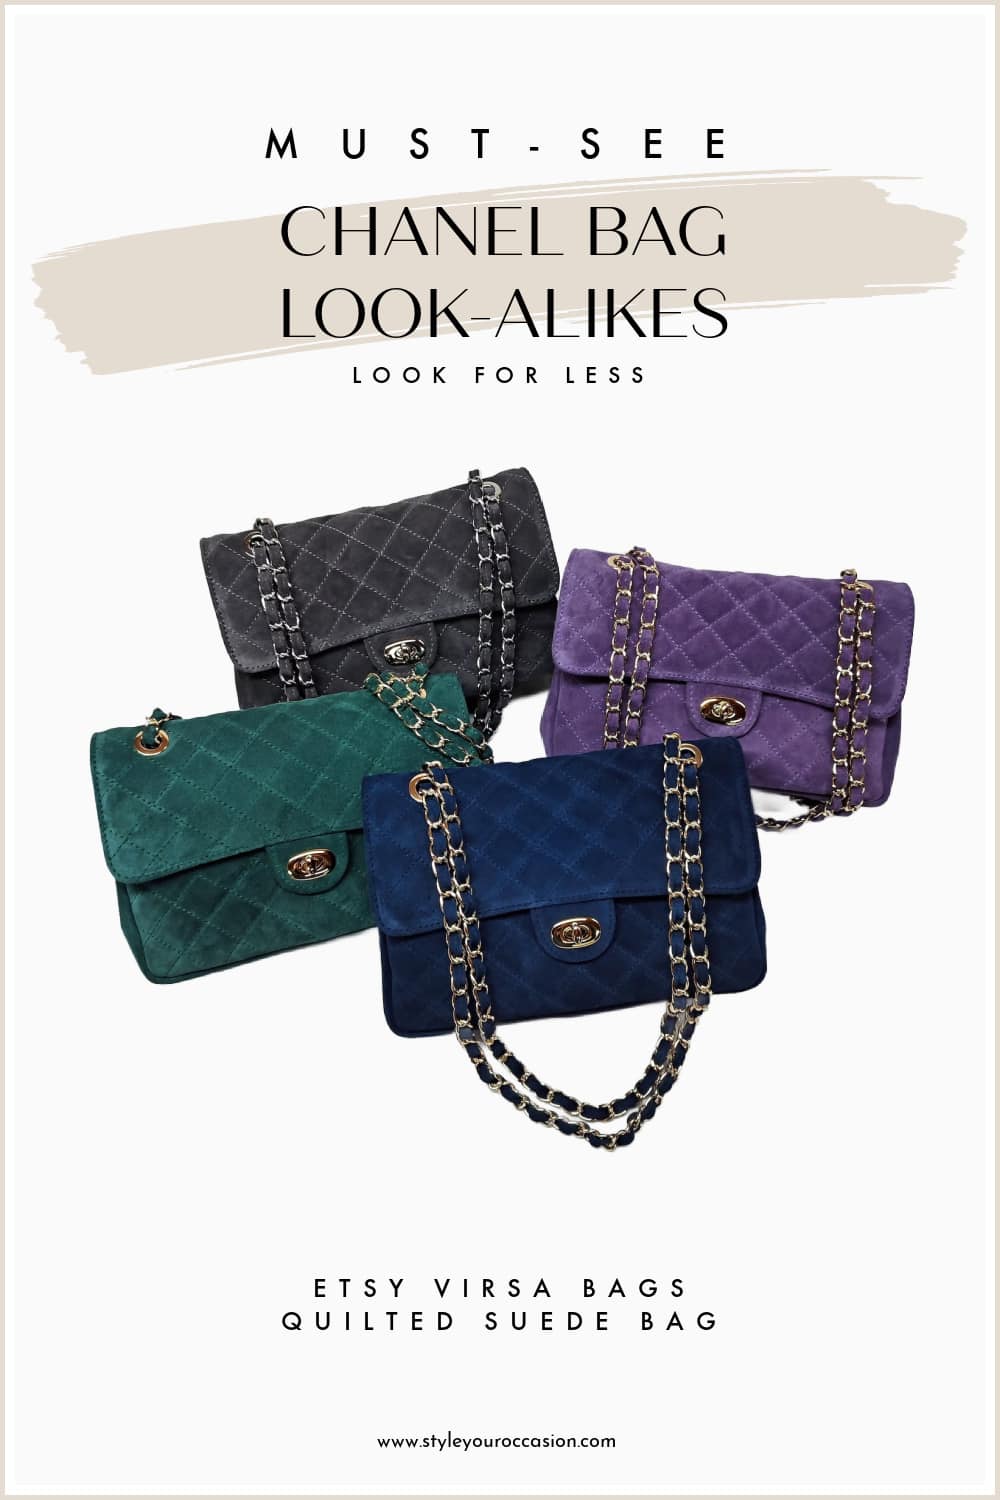 image of four quilted suede bags that are dupes of the Chanel suede flap bag